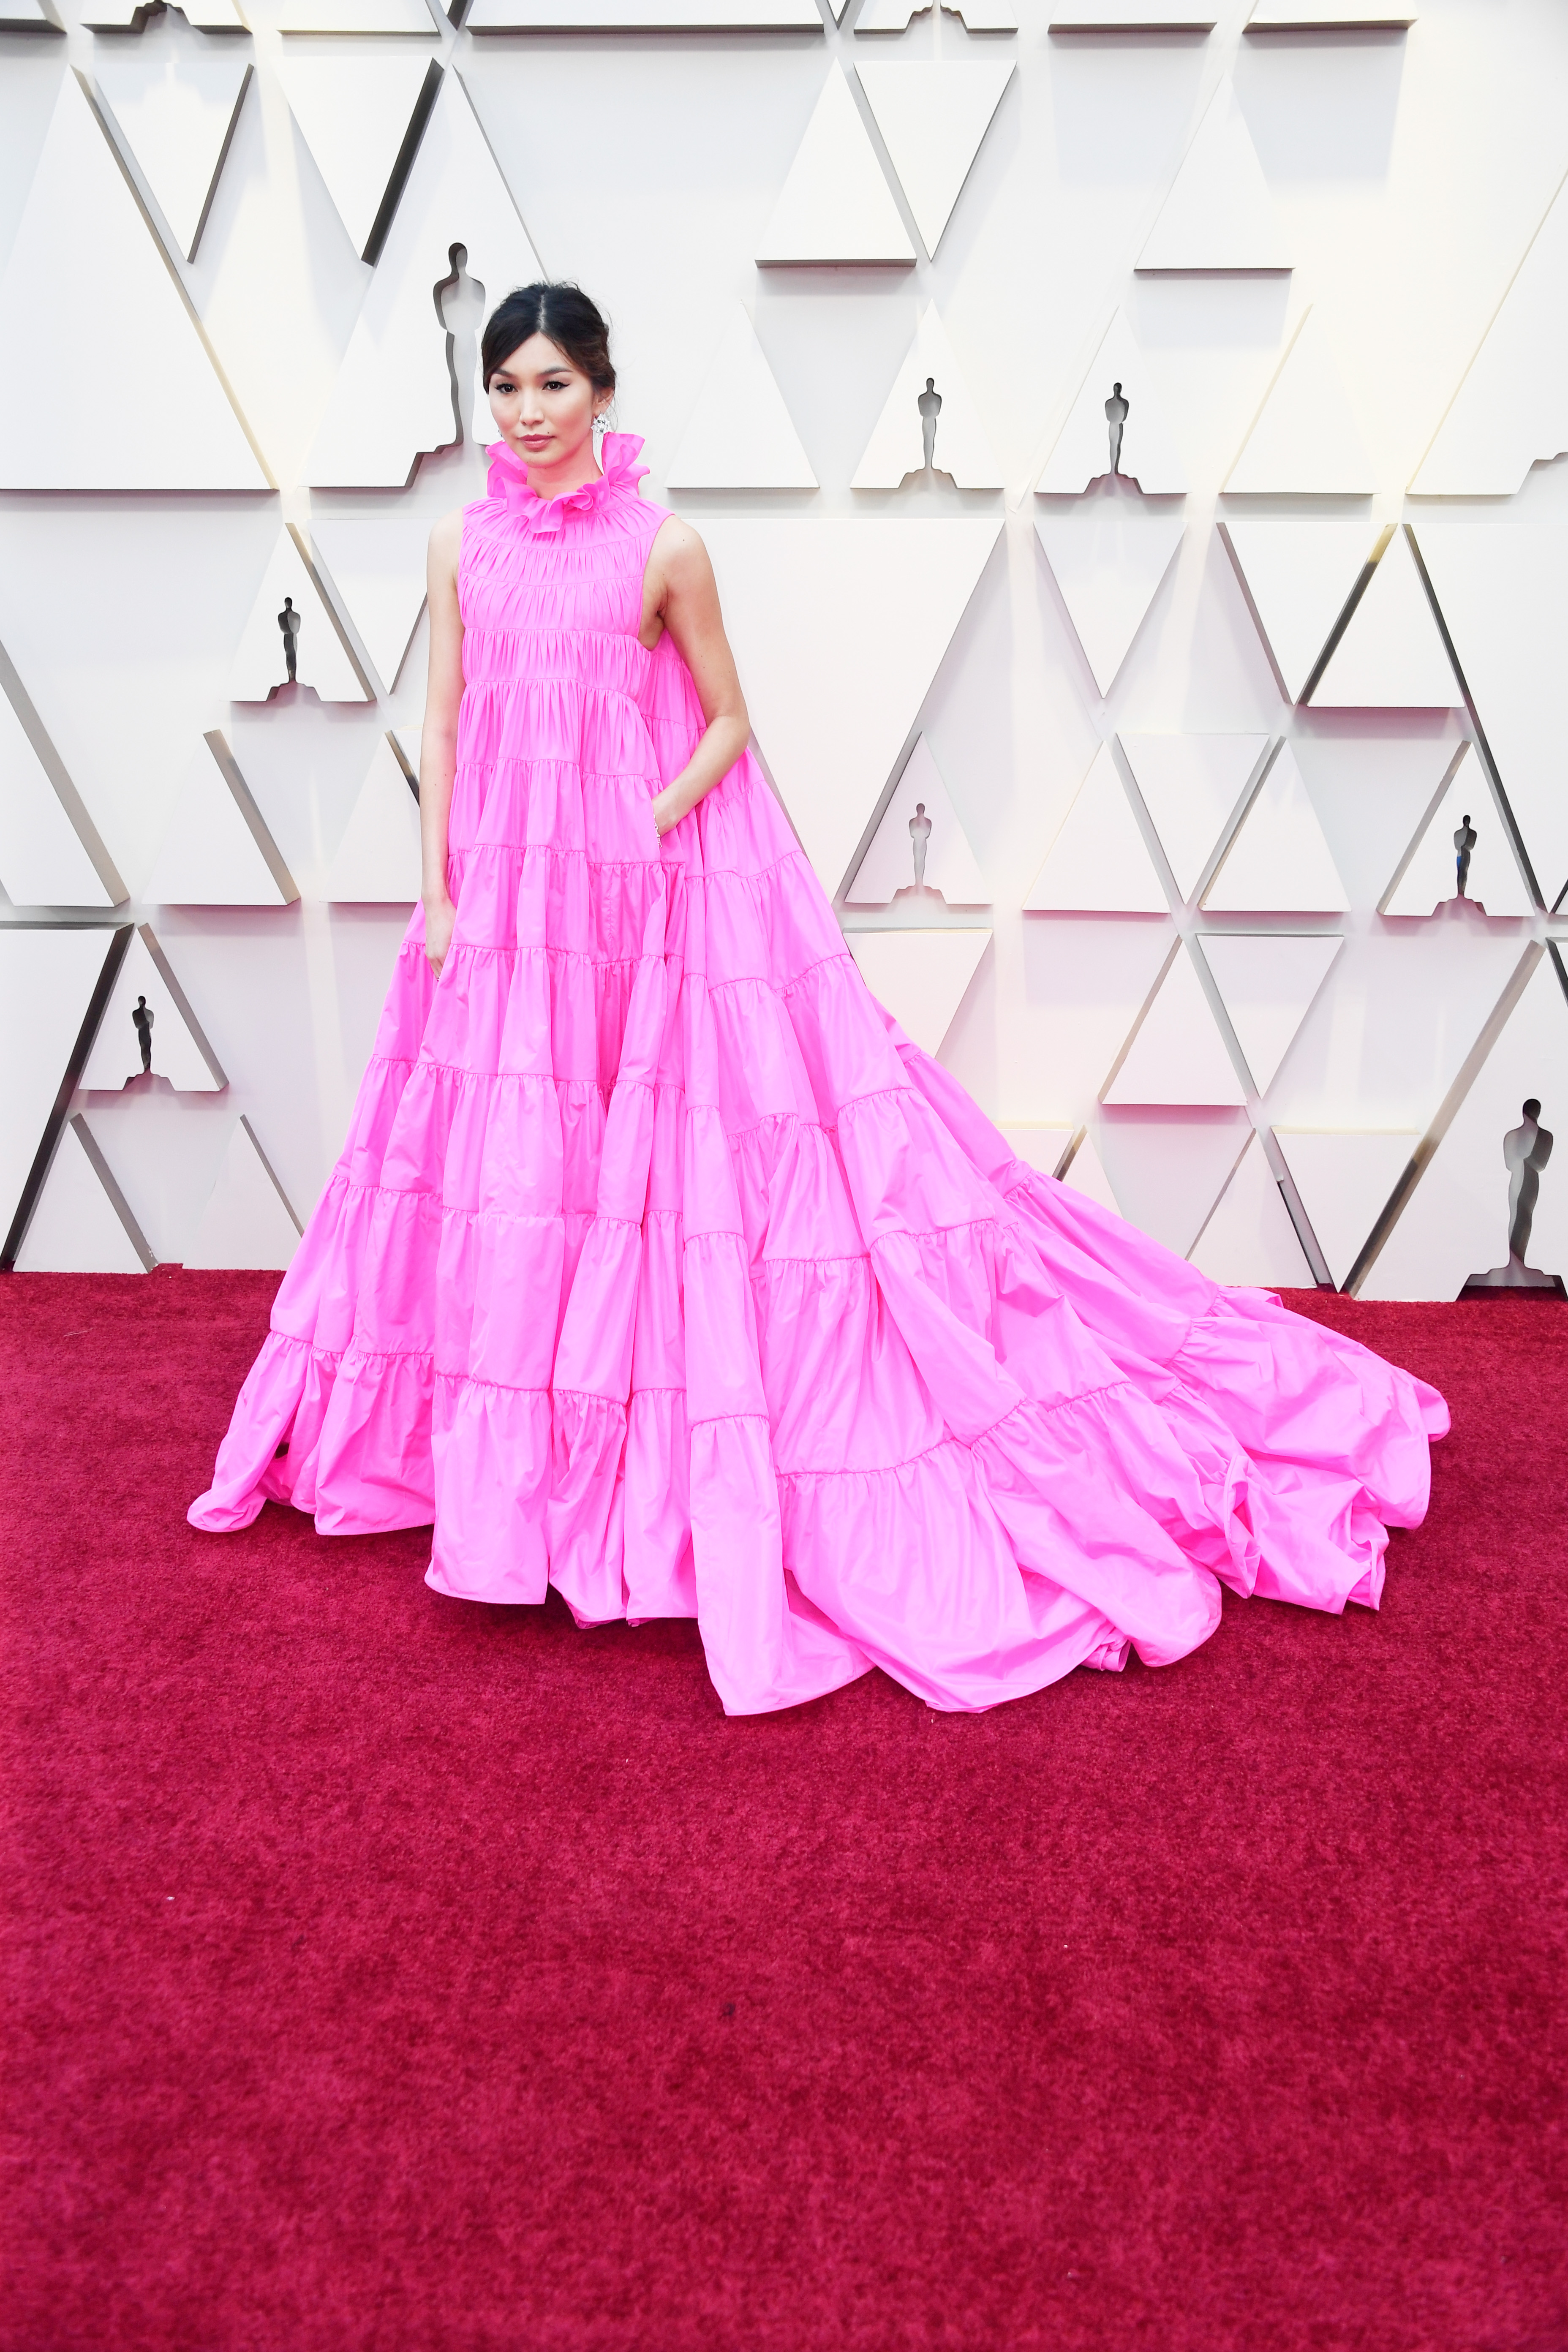 Gemma Chan in Valentino Couture
(Photo by Frazer Harrison/Getty Images)